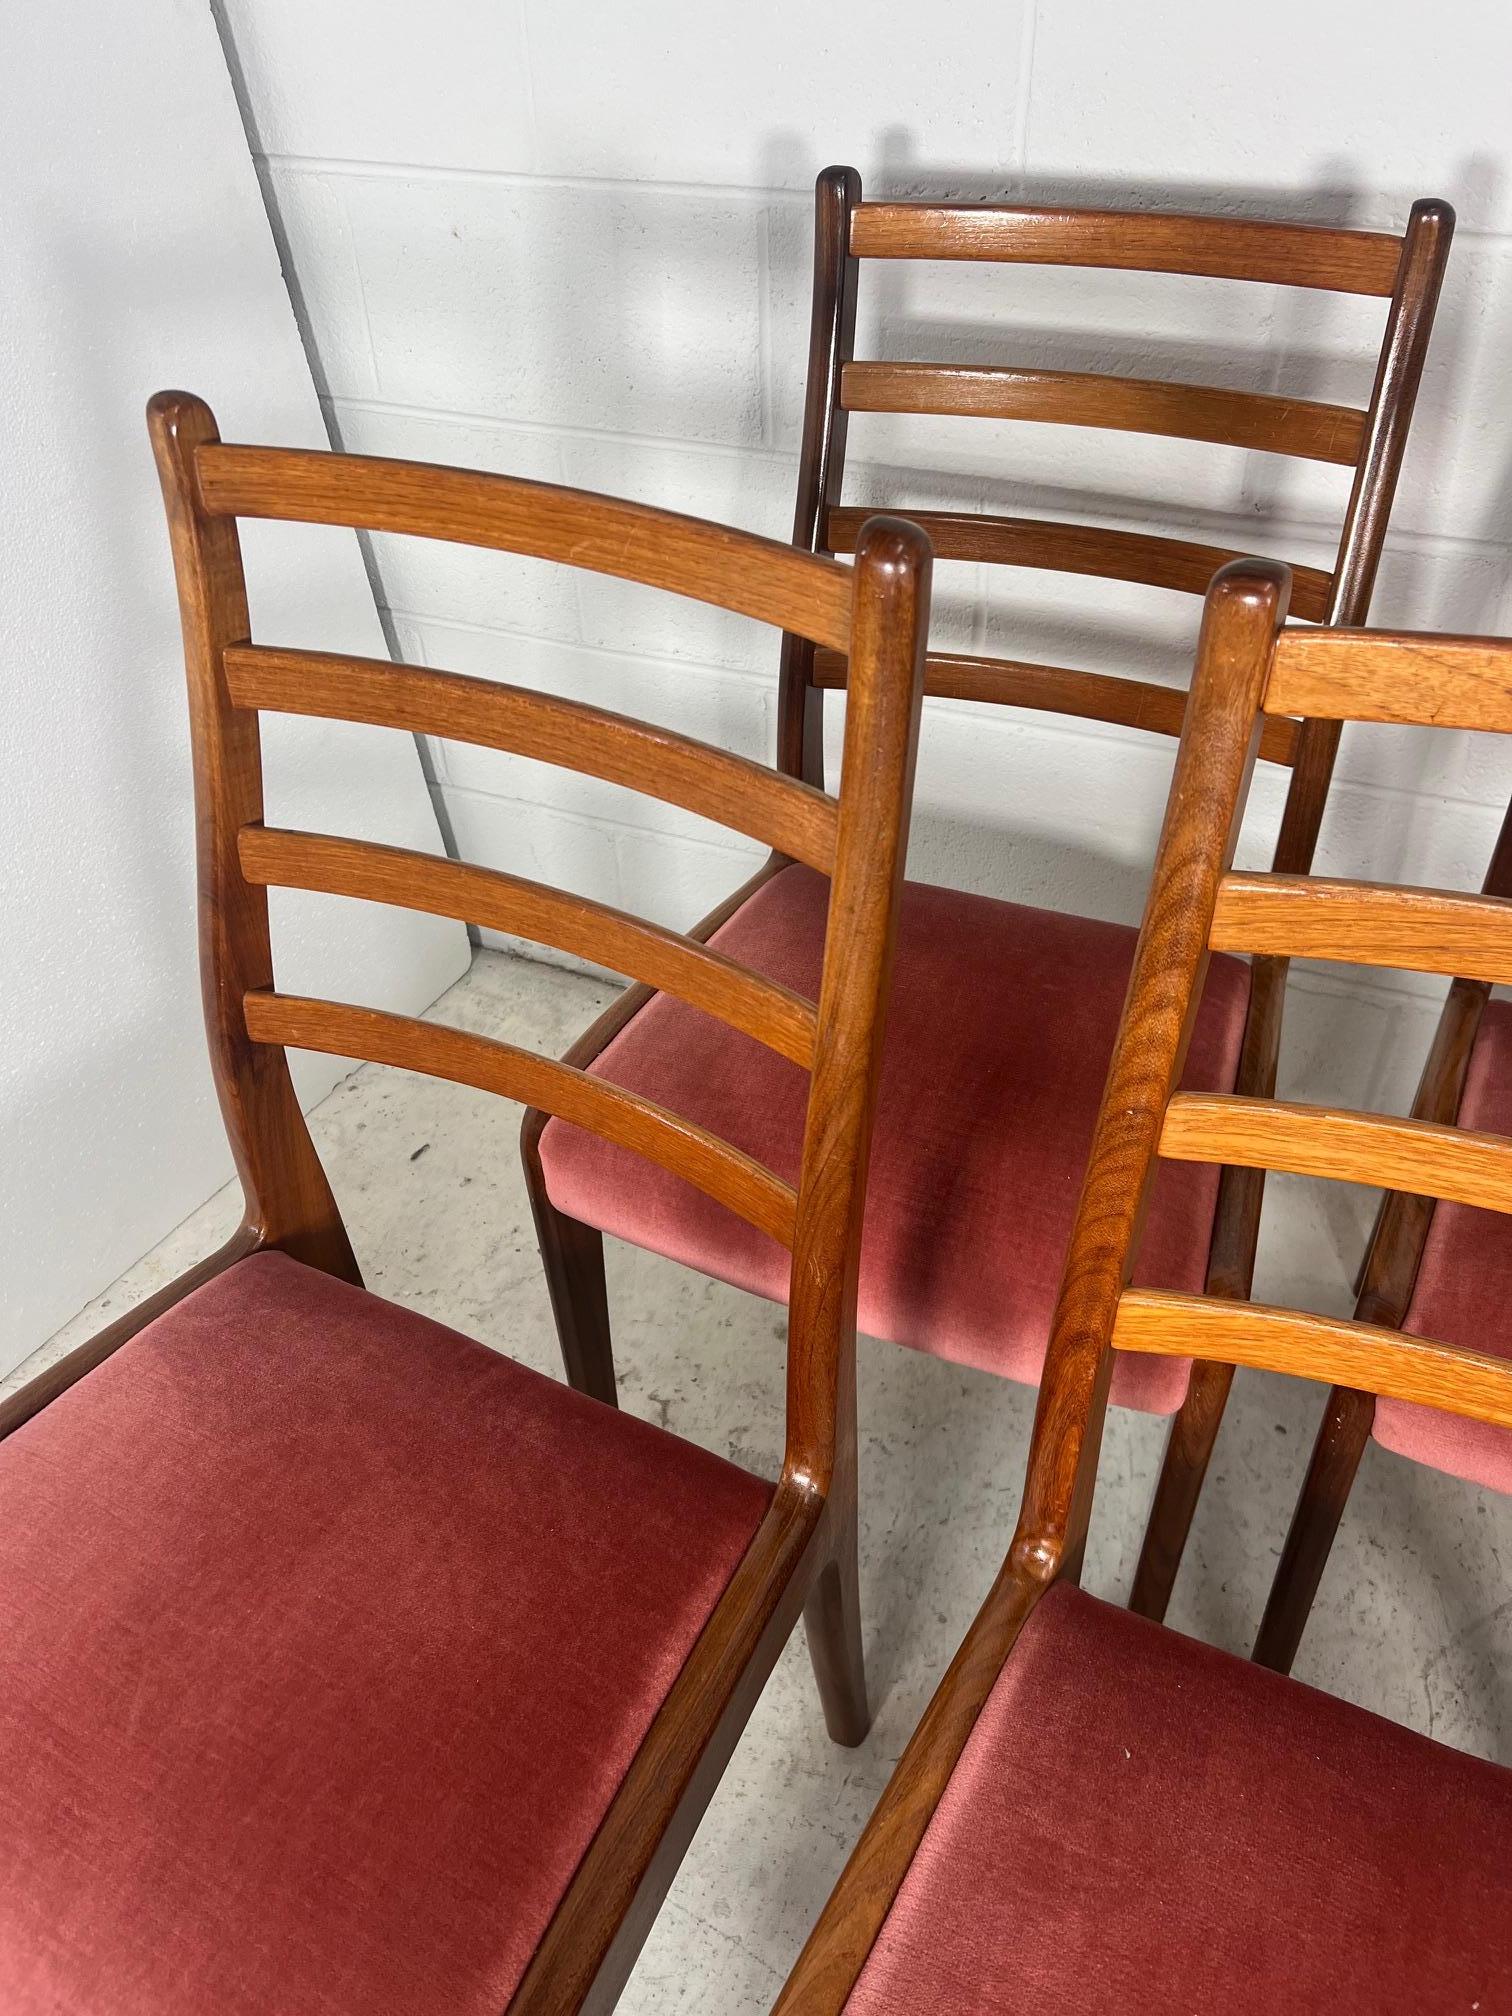 This is a sunning set of 6 teak ladder back dining chairs. Made in England by G Plan.

Some marks and scratches on frames, very good condition overall. Pink velvet seat covers. 

Dimensions: 18.5